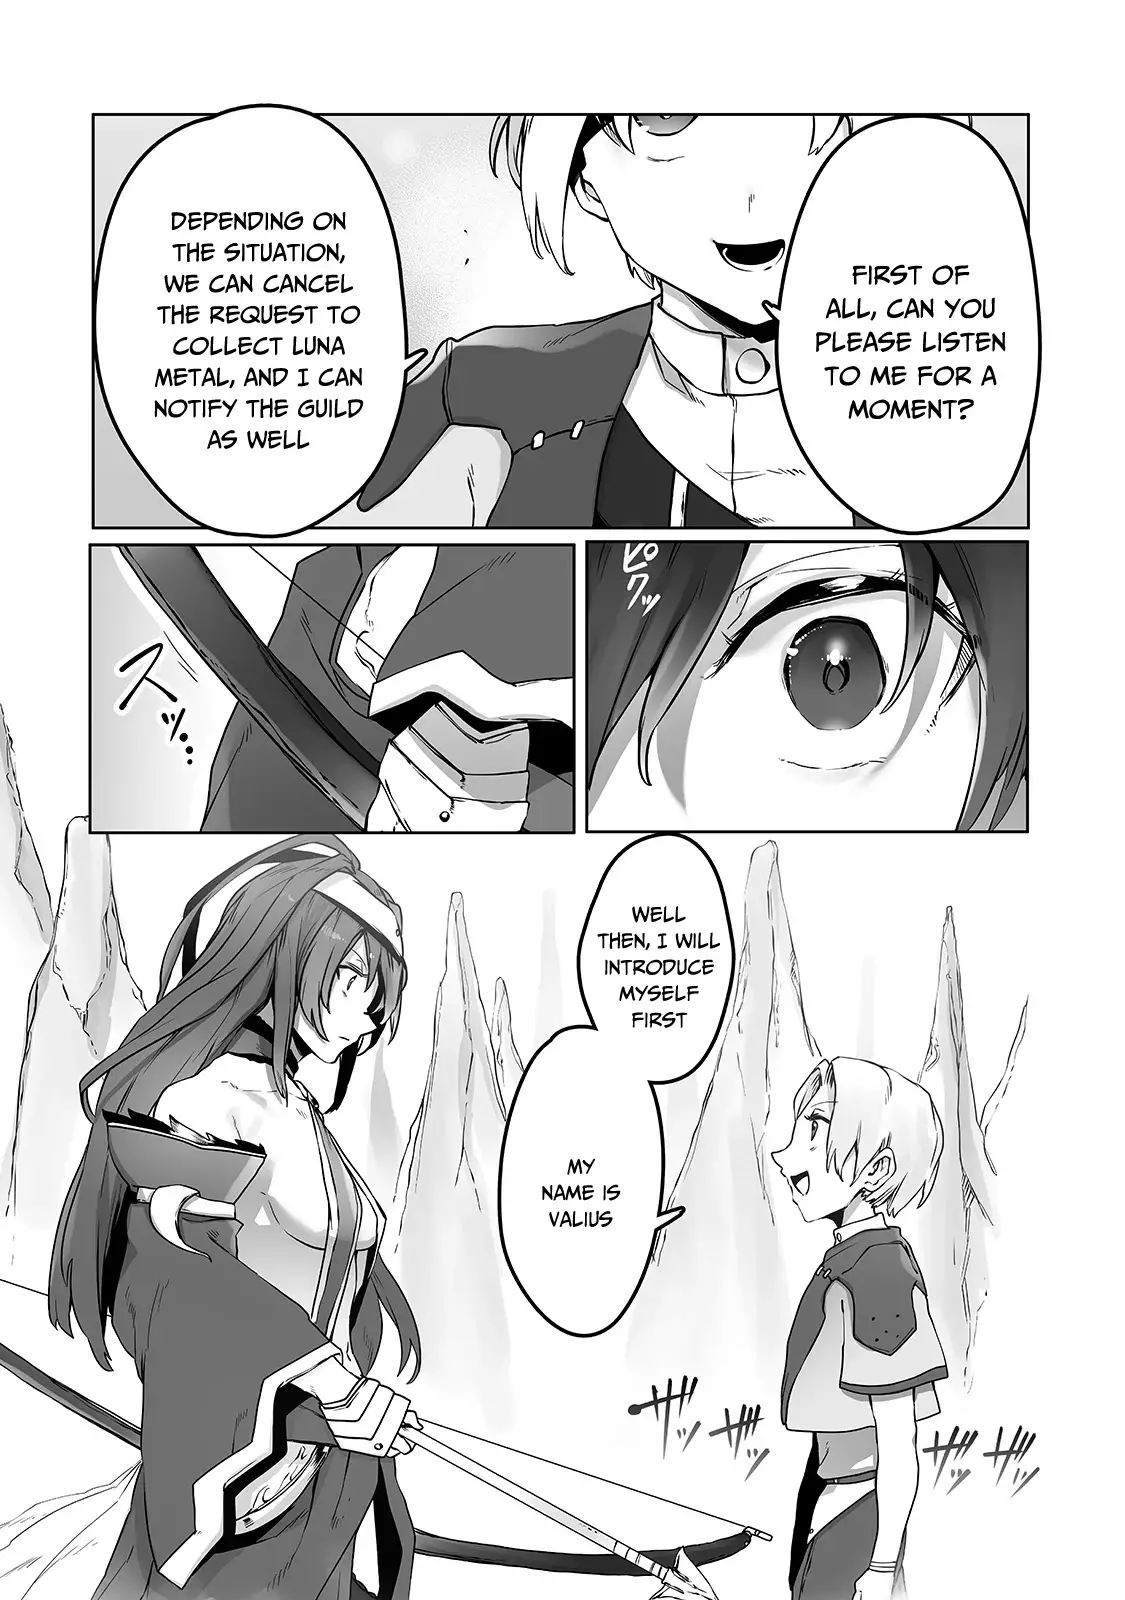 The Useless Tamer Will Turn Into The Top Unconsciously By My Previous Life Knowledge - 10 page 4